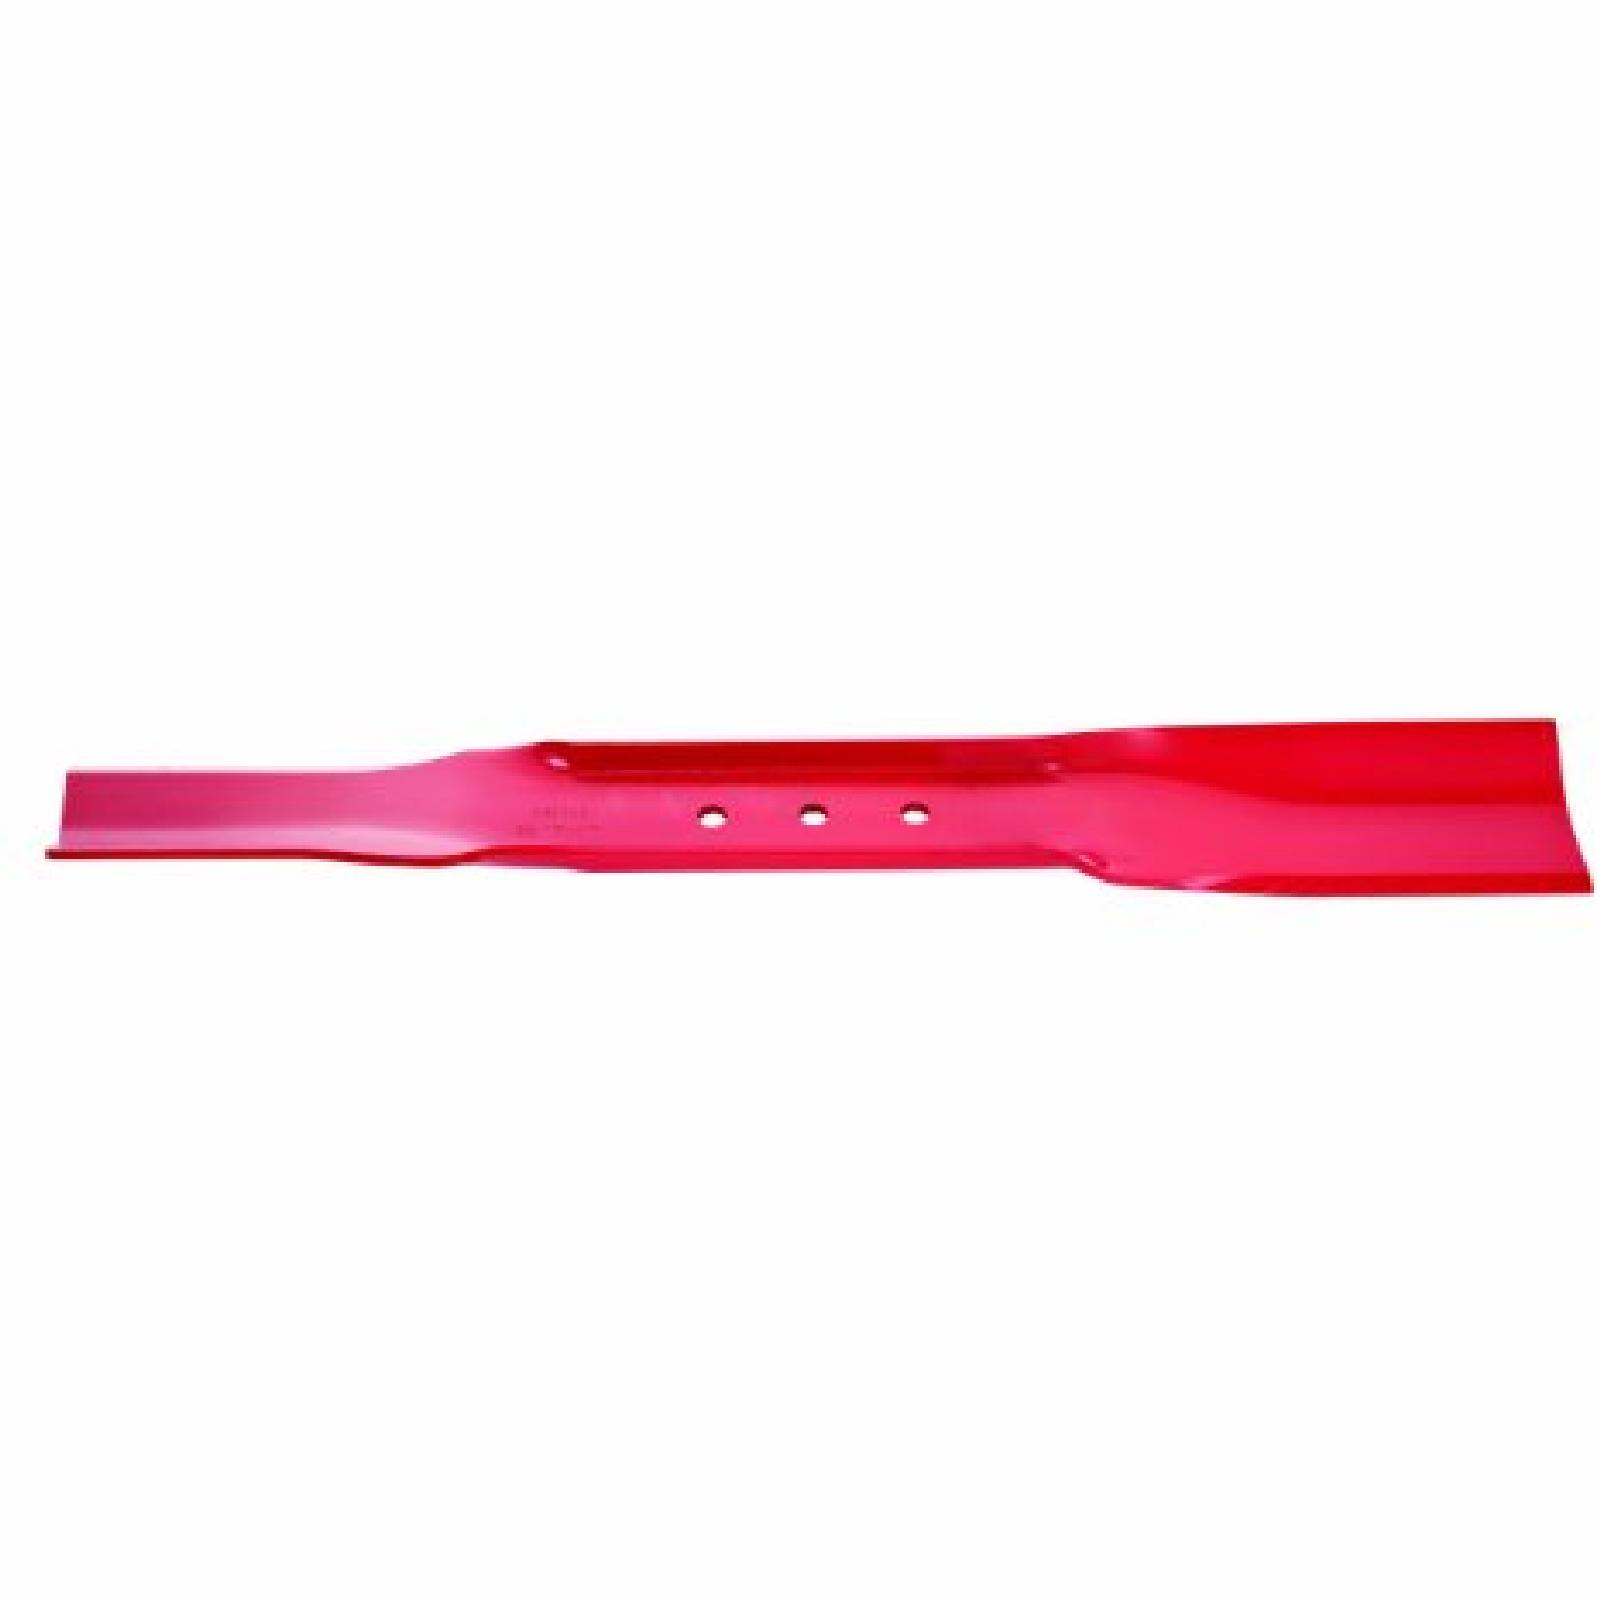 BLADE , SNAPPER 7026691BZY part# 99-103 by Oregon - Click Image to Close